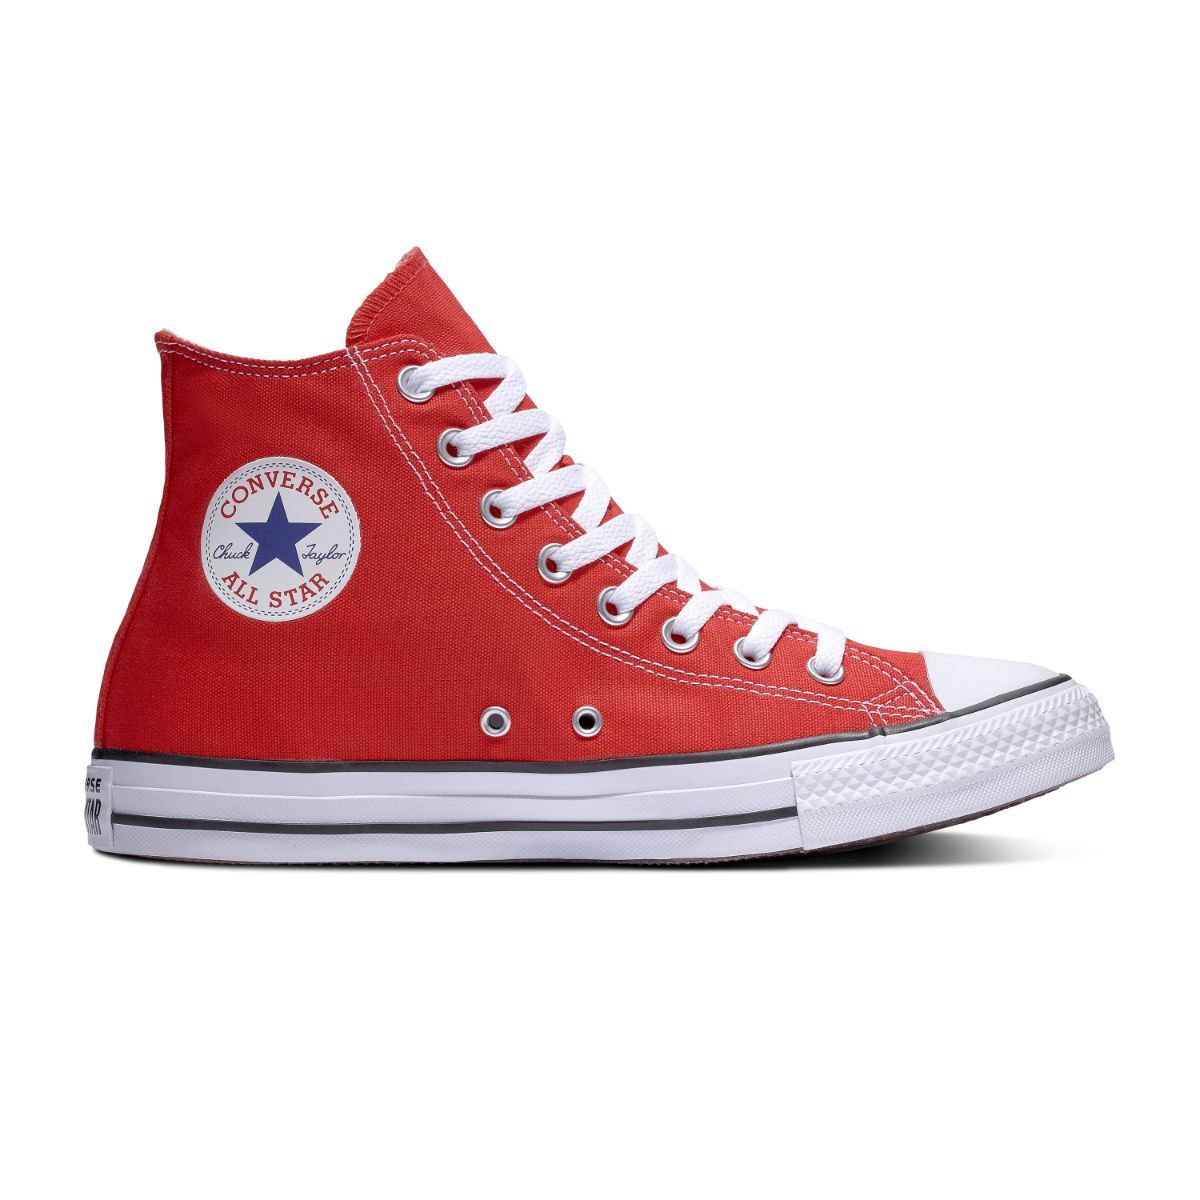 Chuck Taylor All Star Red High Top